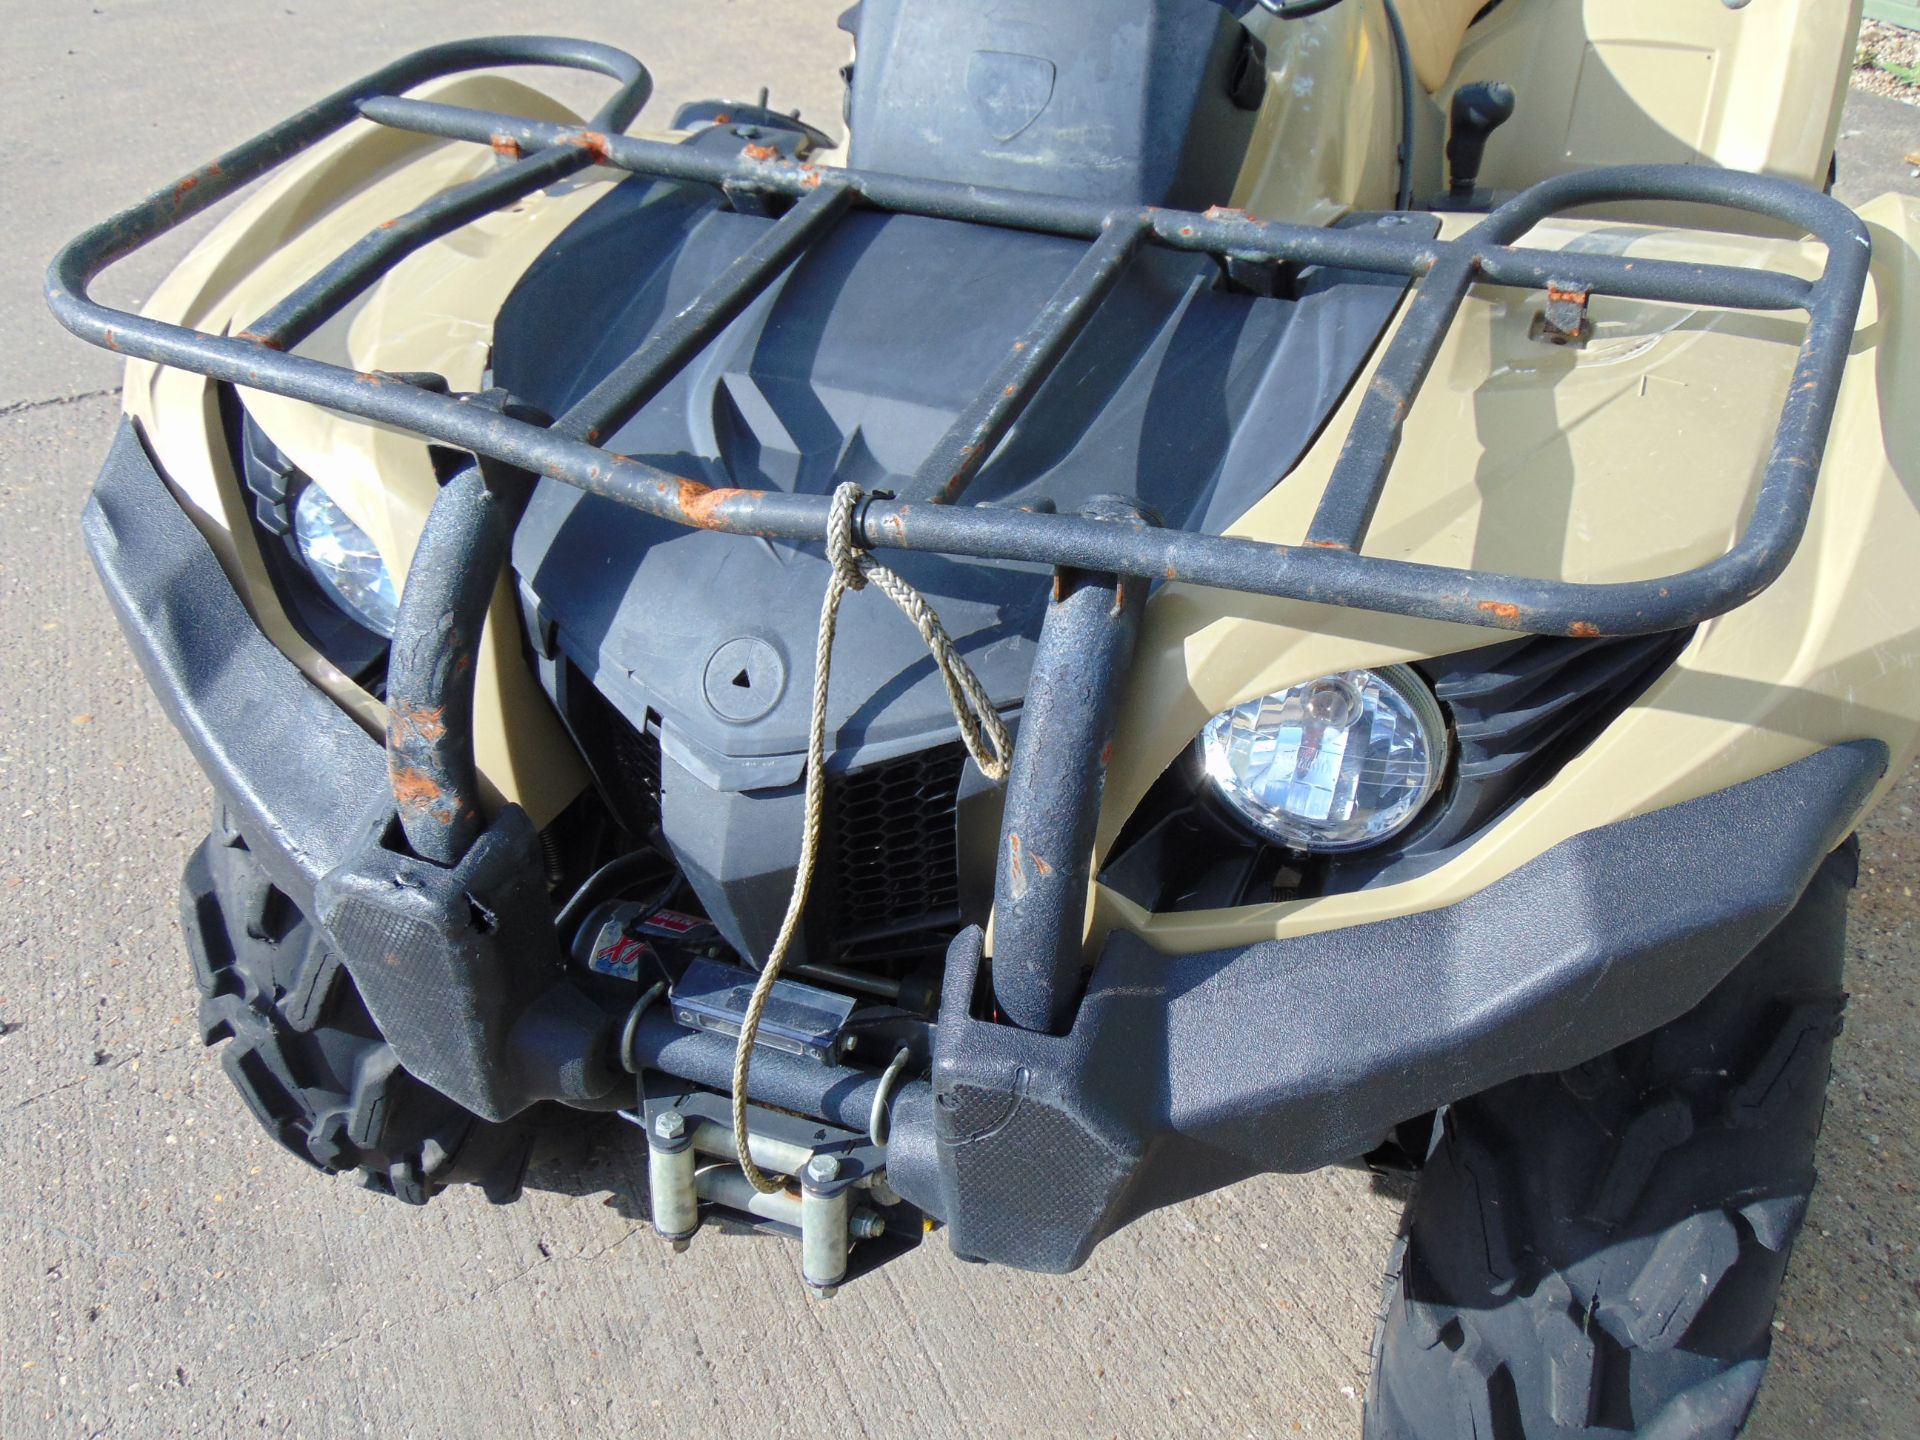 Military Specification Yamaha Grizzly 450 4 x 4 ATV Quad Bike - Image 10 of 14